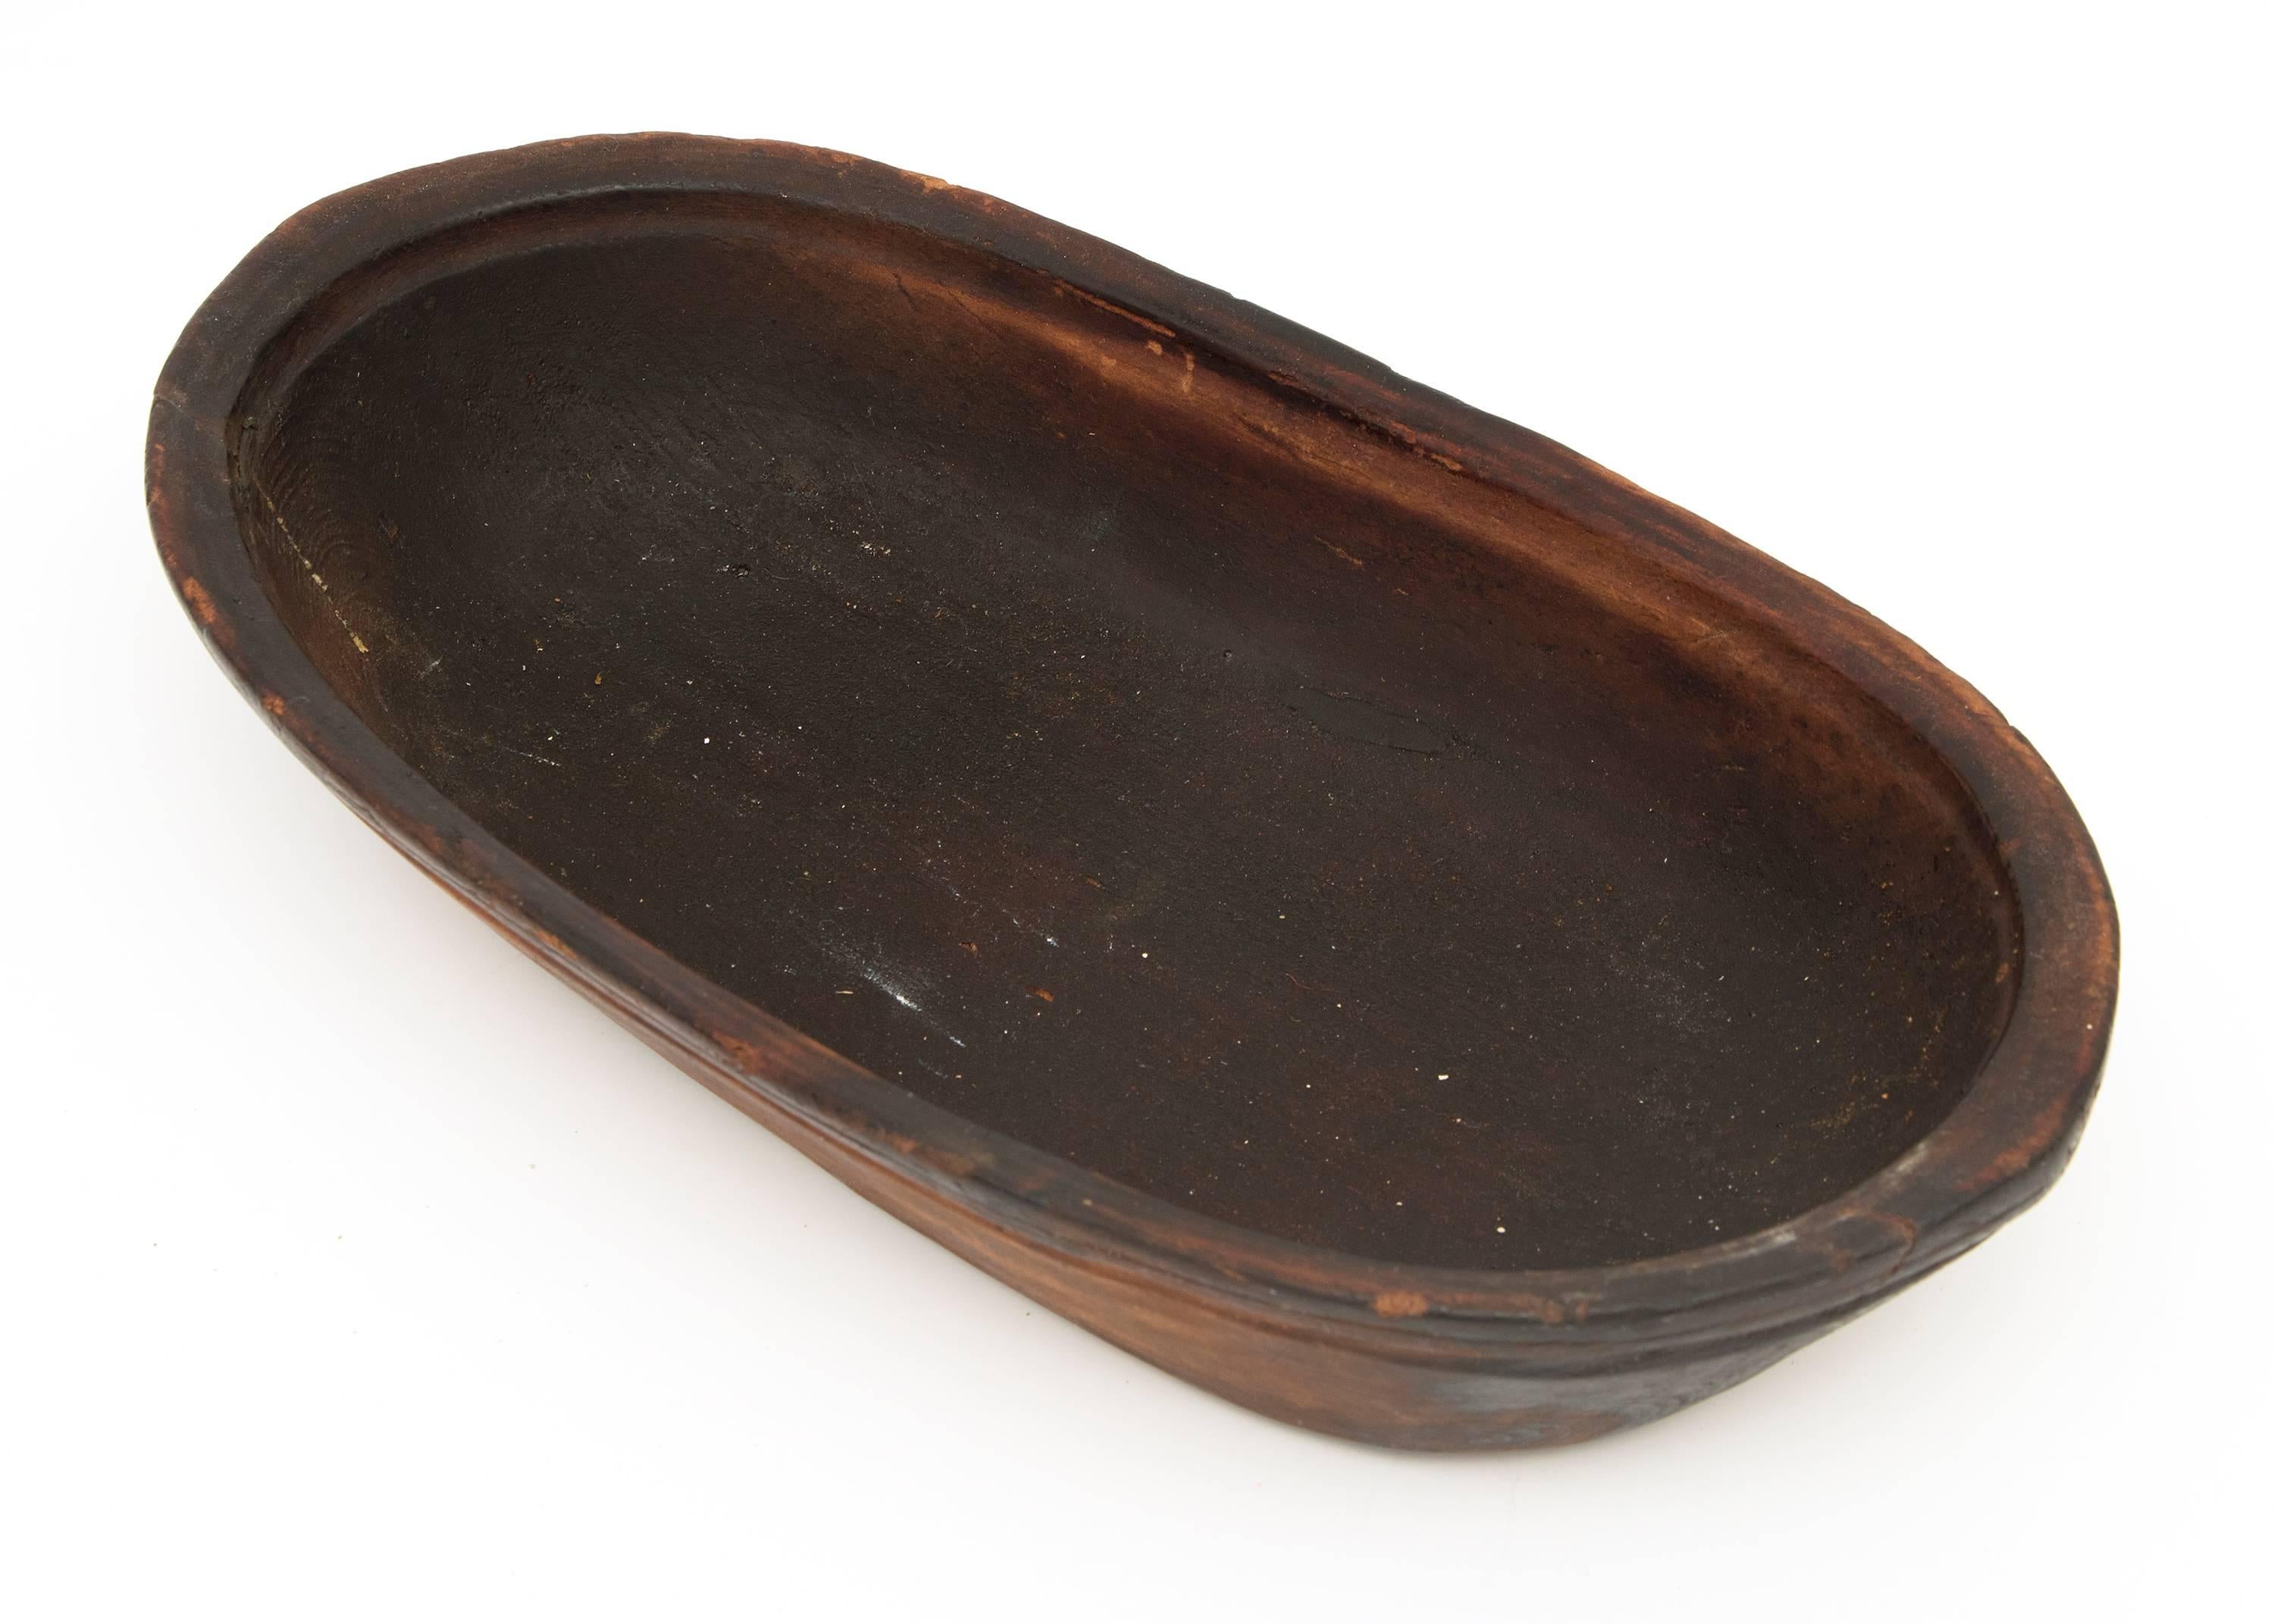 Inuit (Eskimo) oblong bowl from the 19th century with great patina. Bowl measures 14.5 x 8 x 2.75 inches. 

The Inuit territory includes northern Canada and parts of Alaska.

Expedited and International shipping is available; please contact us